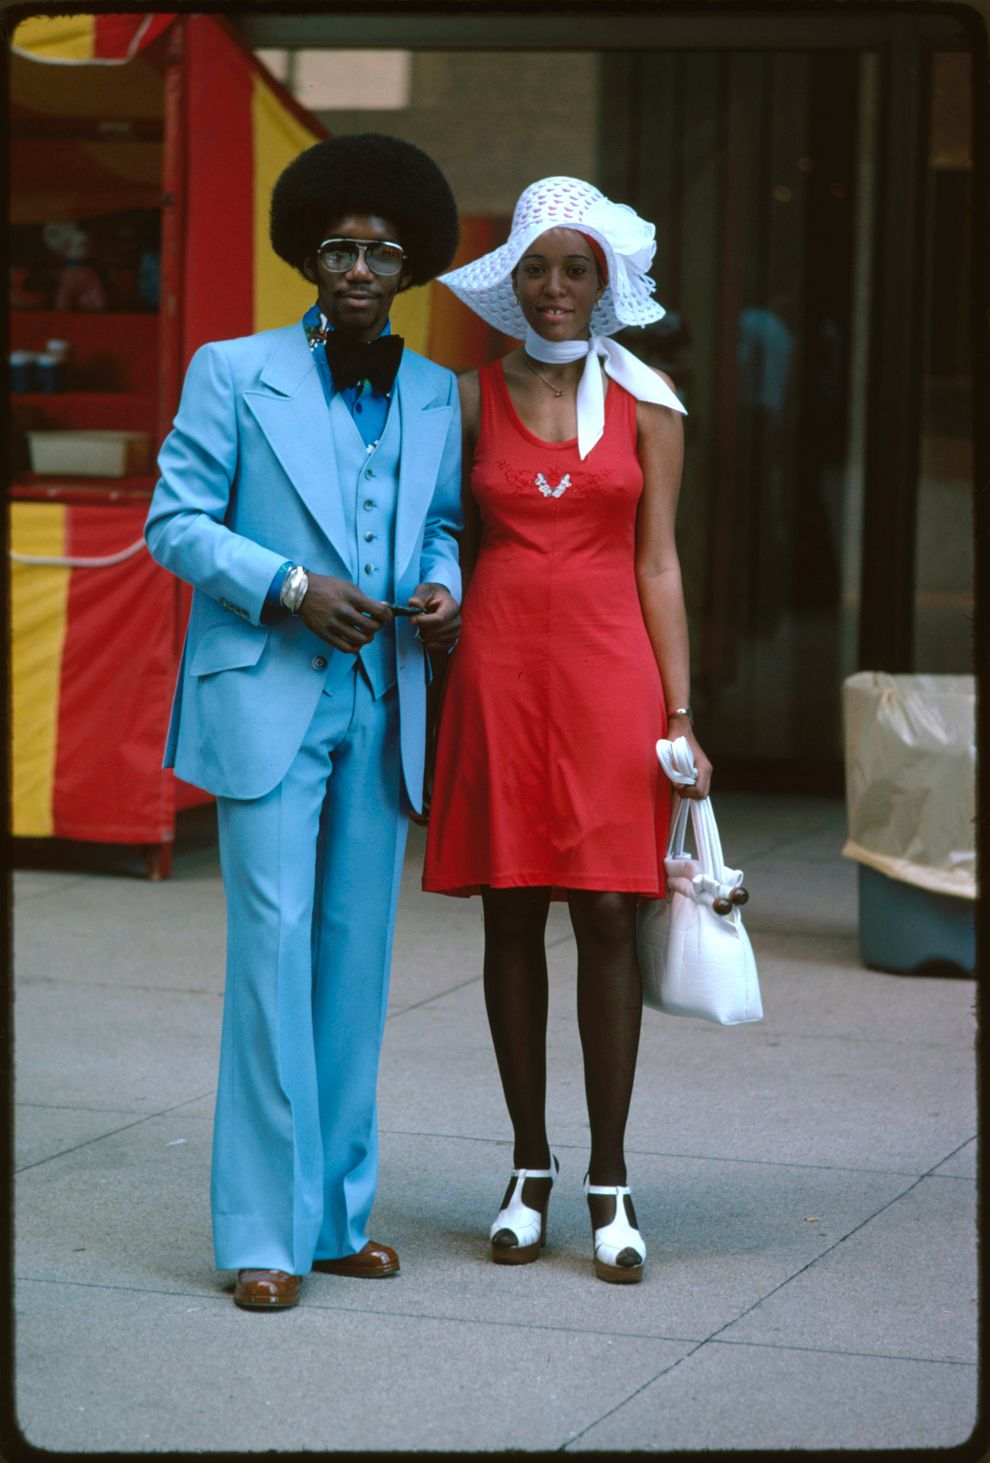 A couple on Michigan Avenue in Chicago, summer 1975